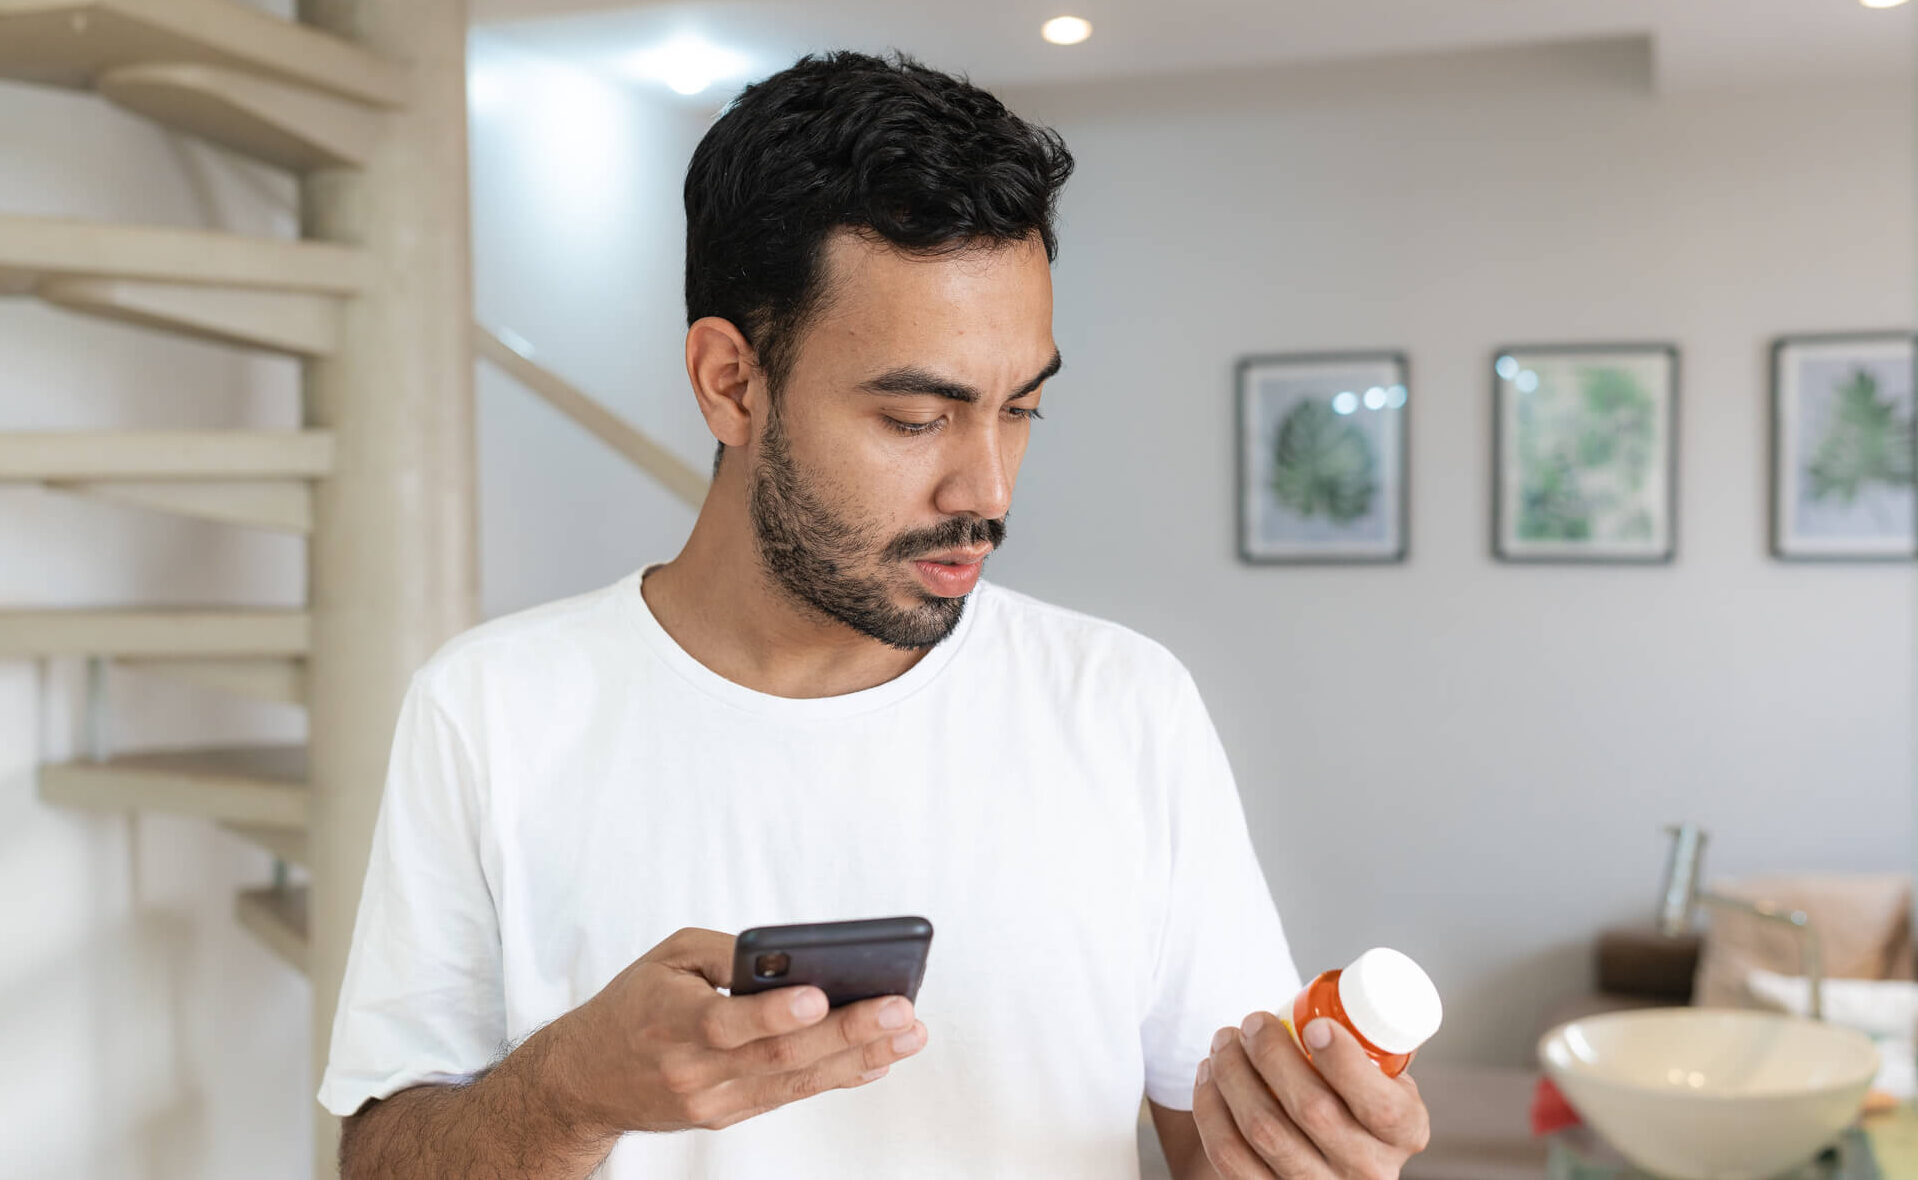 Man looking at prescription bottle and phone